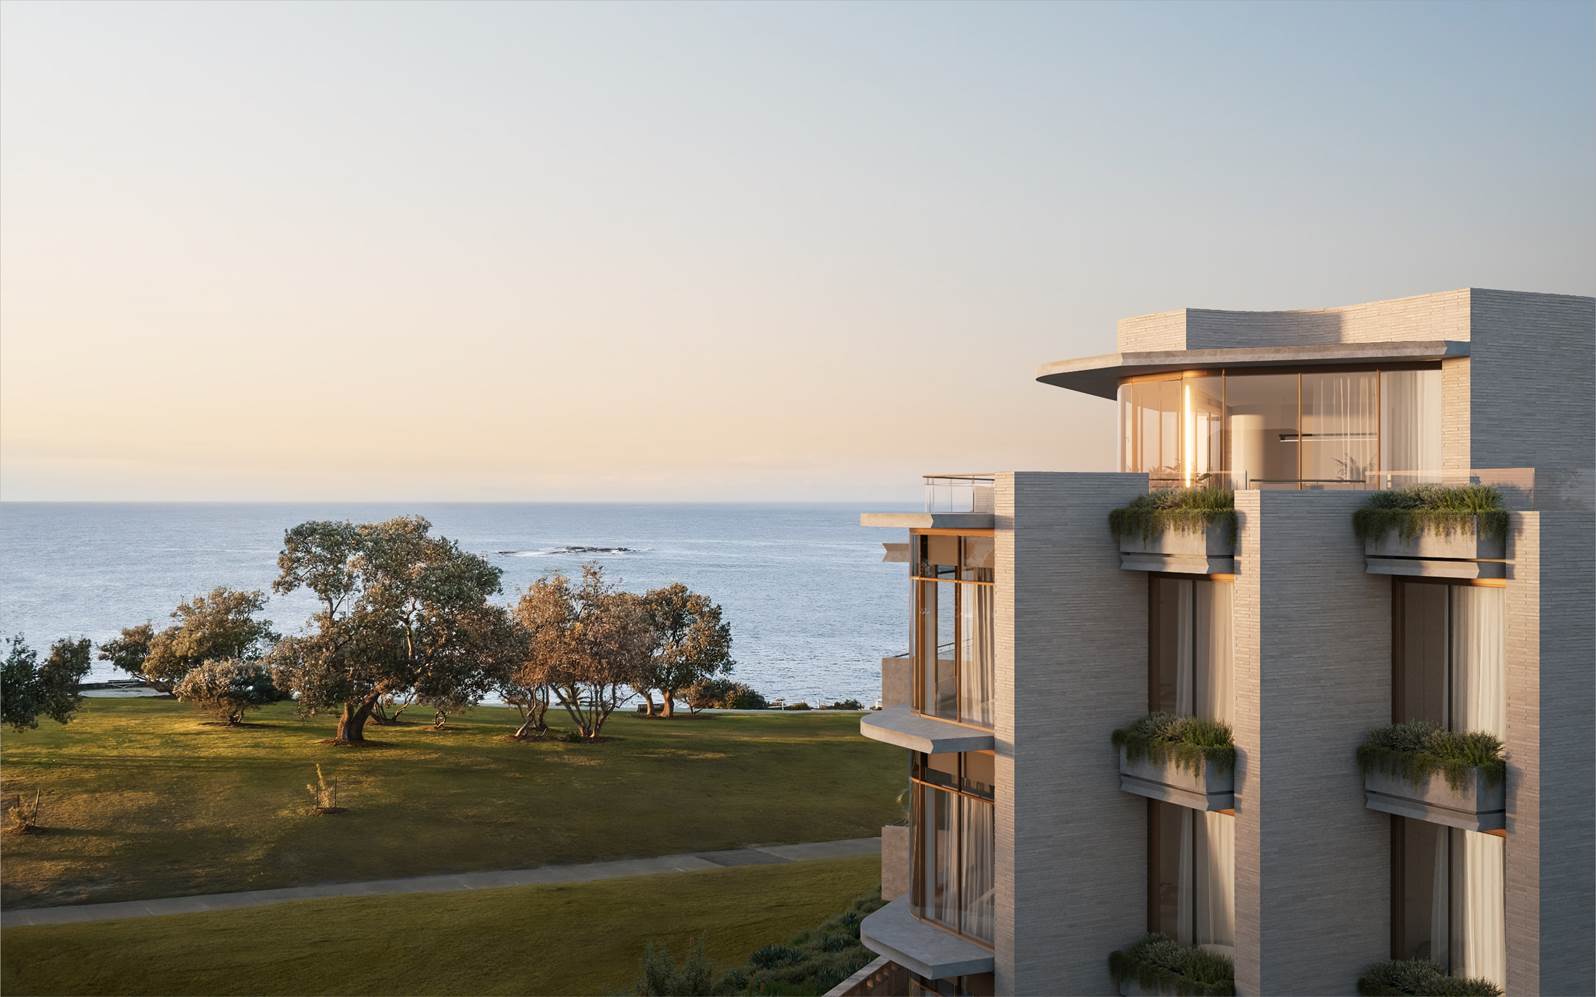 Local downsizer snaps up $20 million Coogee penthouse in record-breaking sale